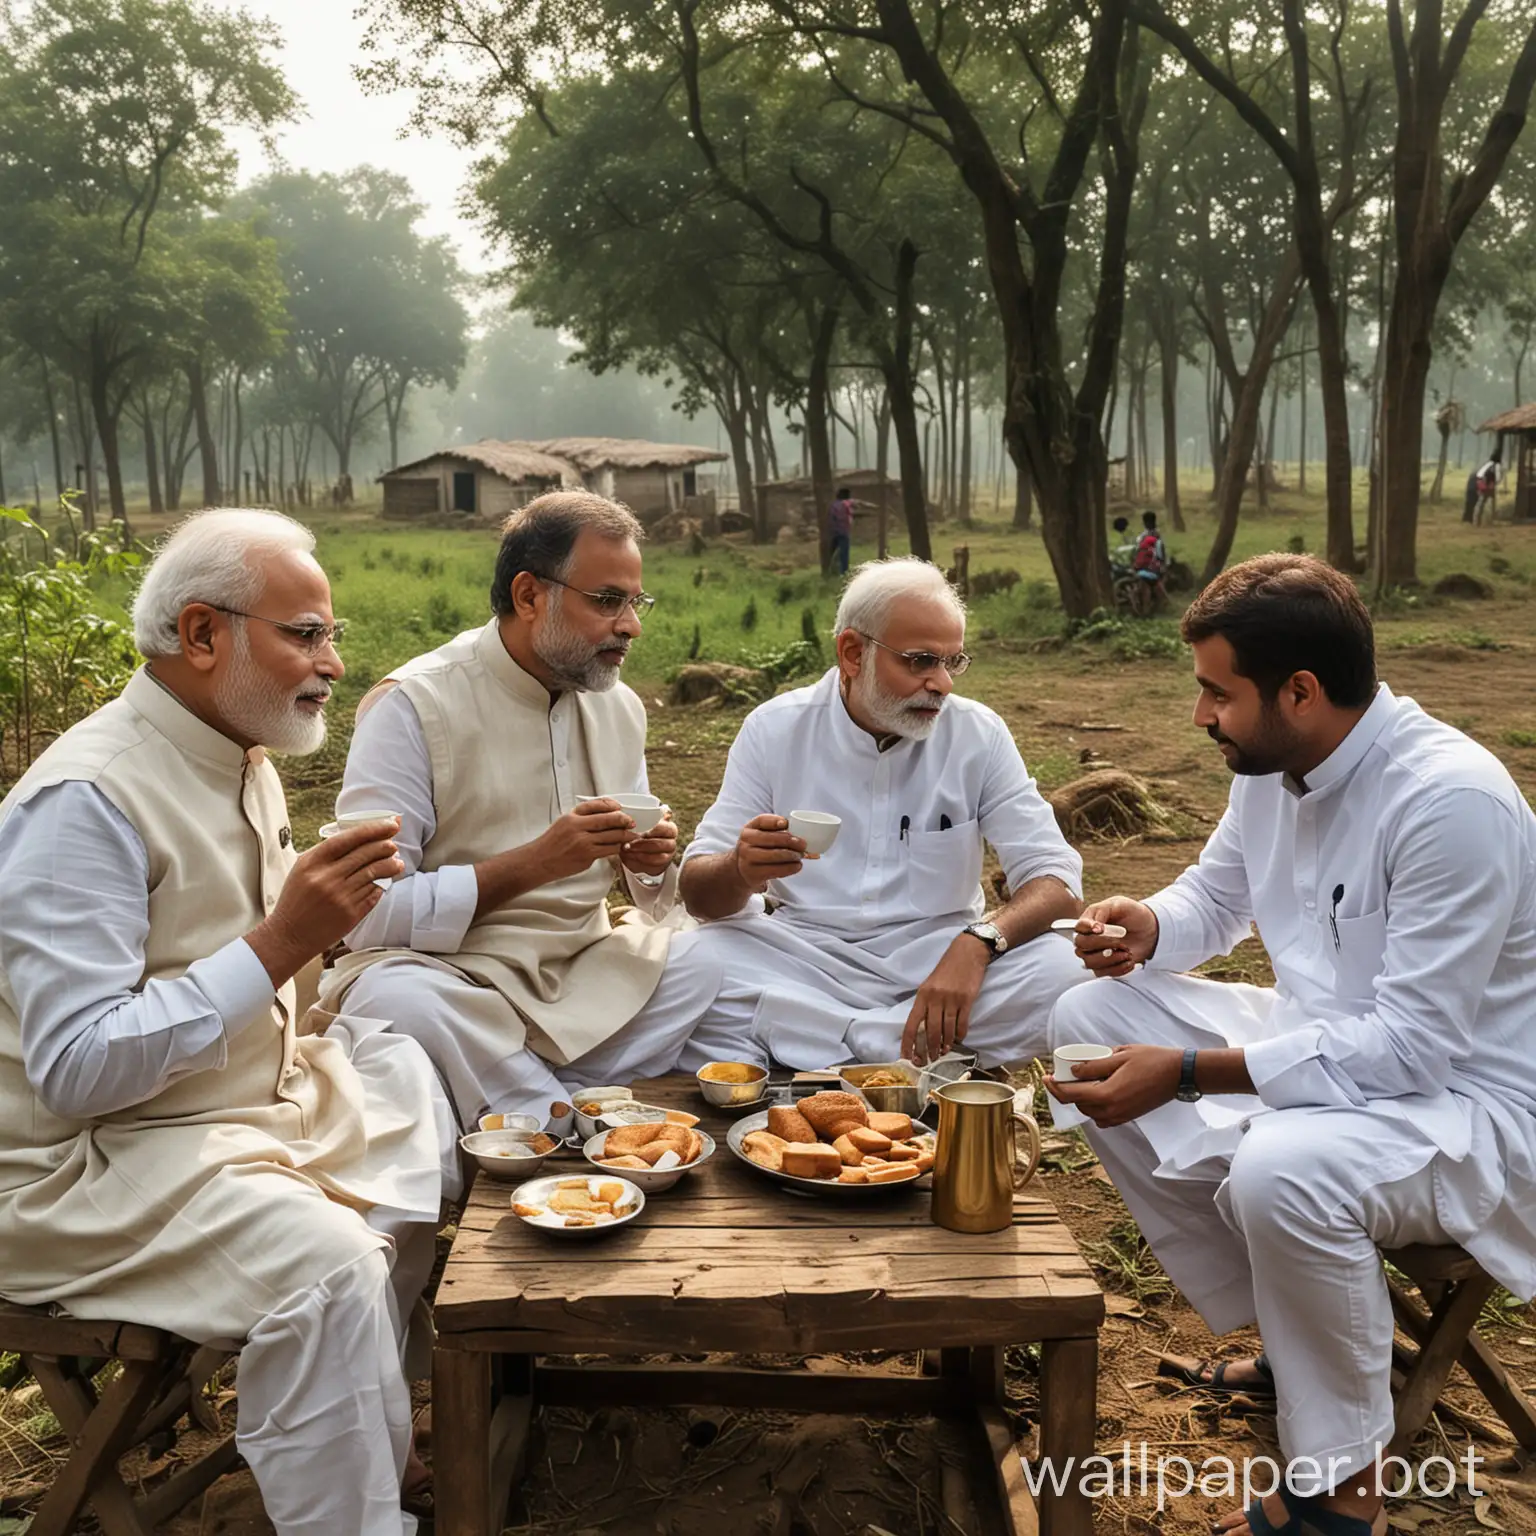 Modi, Rahul and Mamata Banerjee drinking morning tea with breakfast in the morning in a remote Bengali village. Add lots of trees